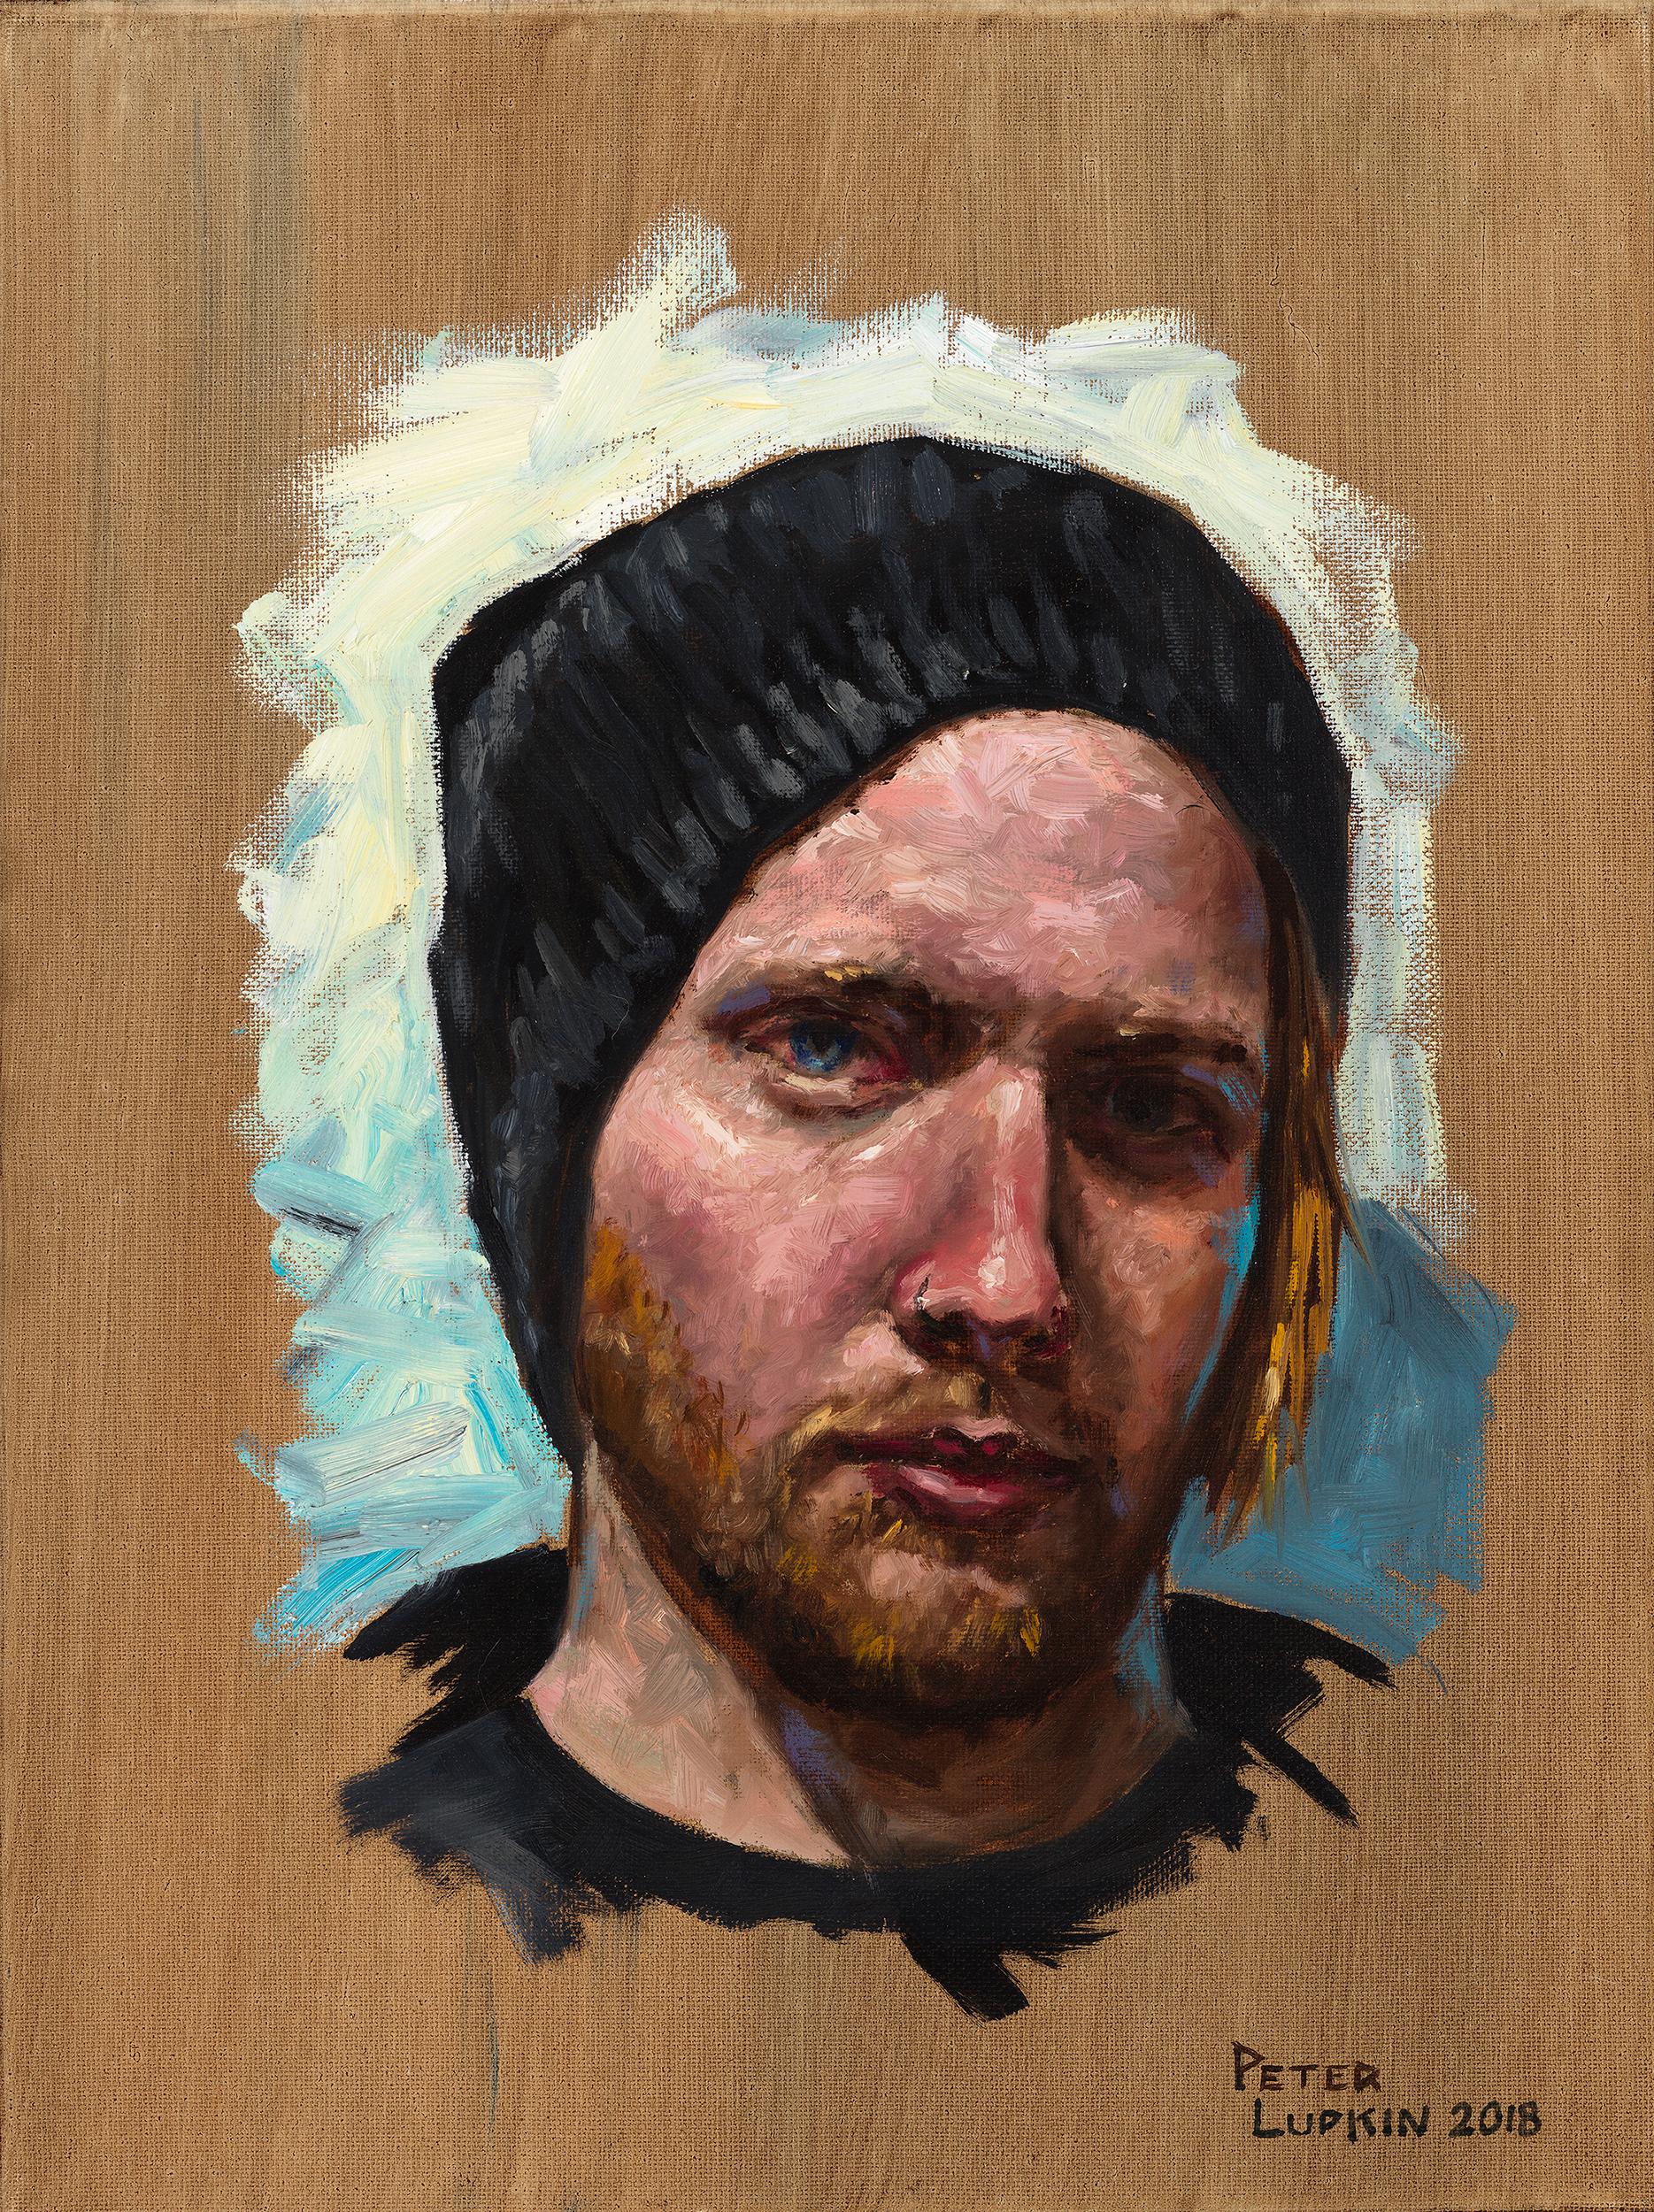 Peter Lupkin Portrait Painting - Ben - Original Oil Painting Portrait of the Artist's Brother in a Beanie Cap